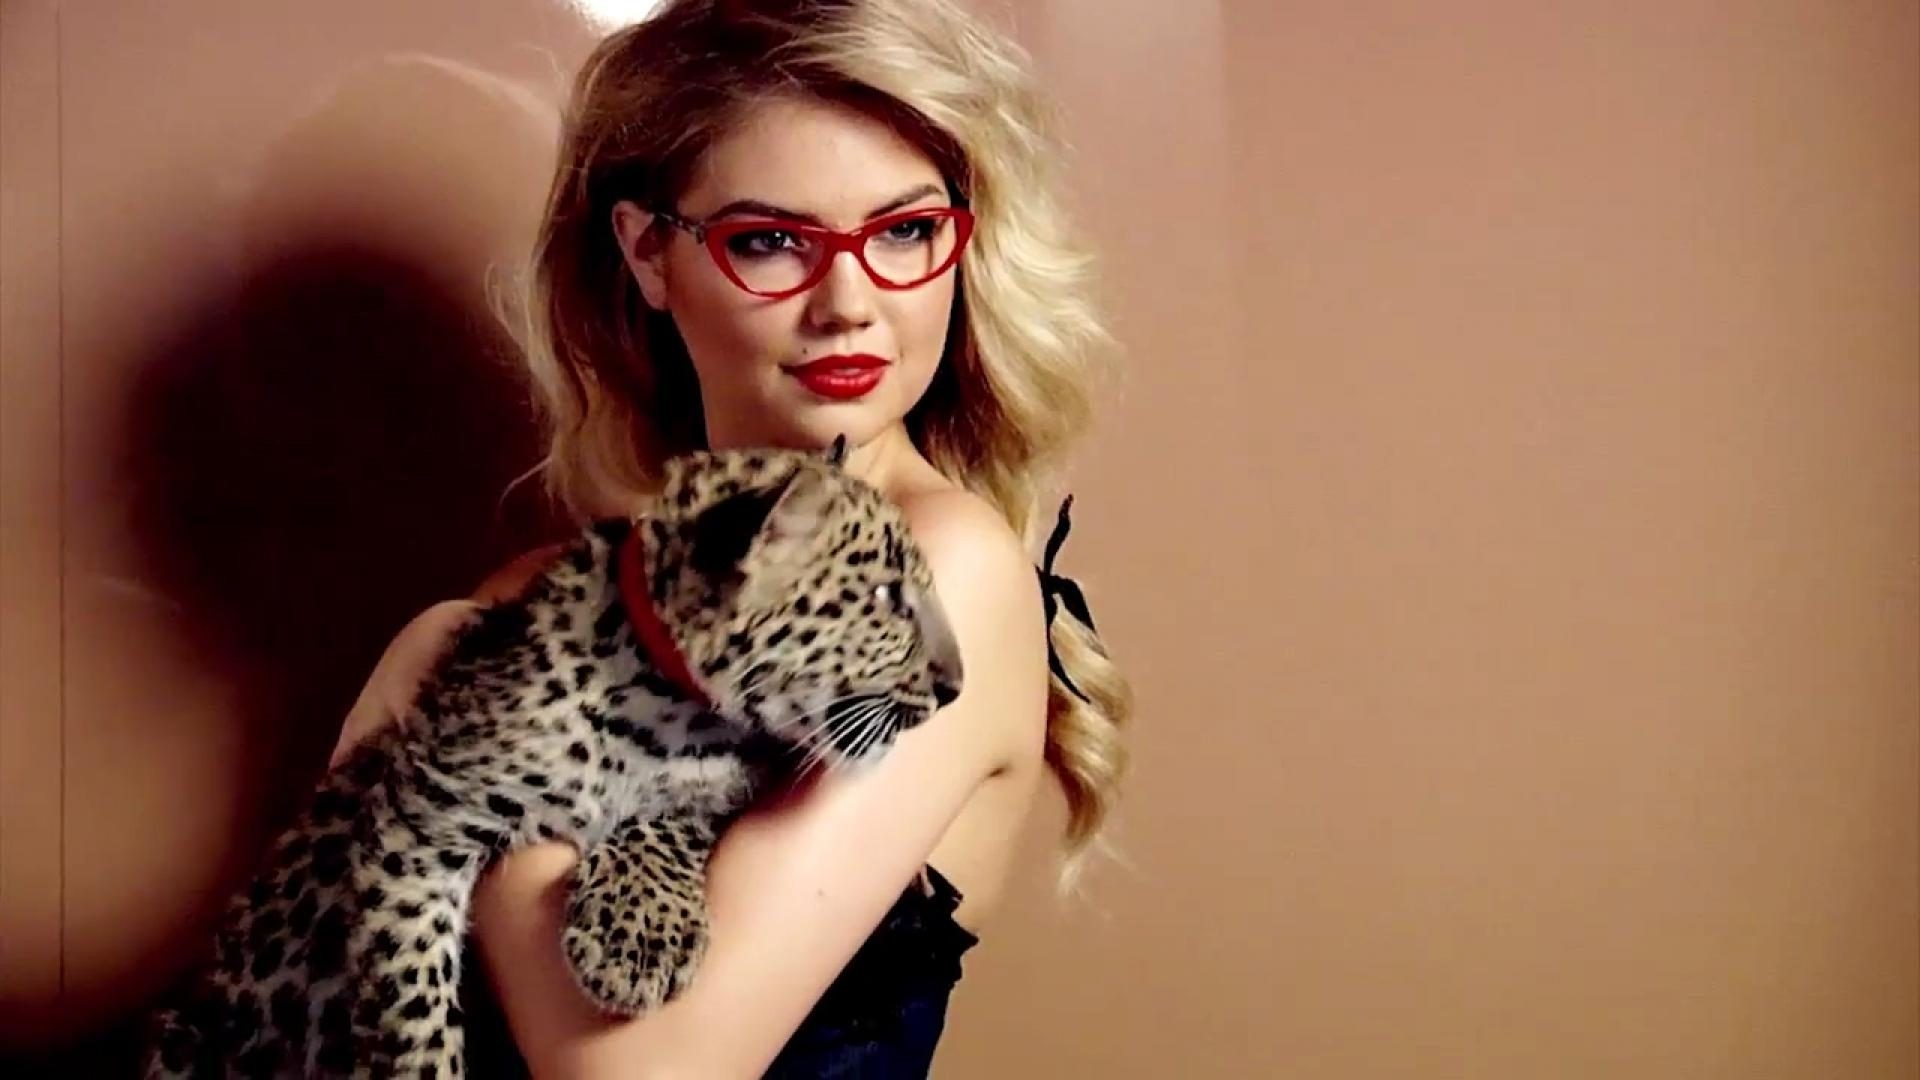 1920x1080 Image: Kate Upton with Tiger Wallpaper